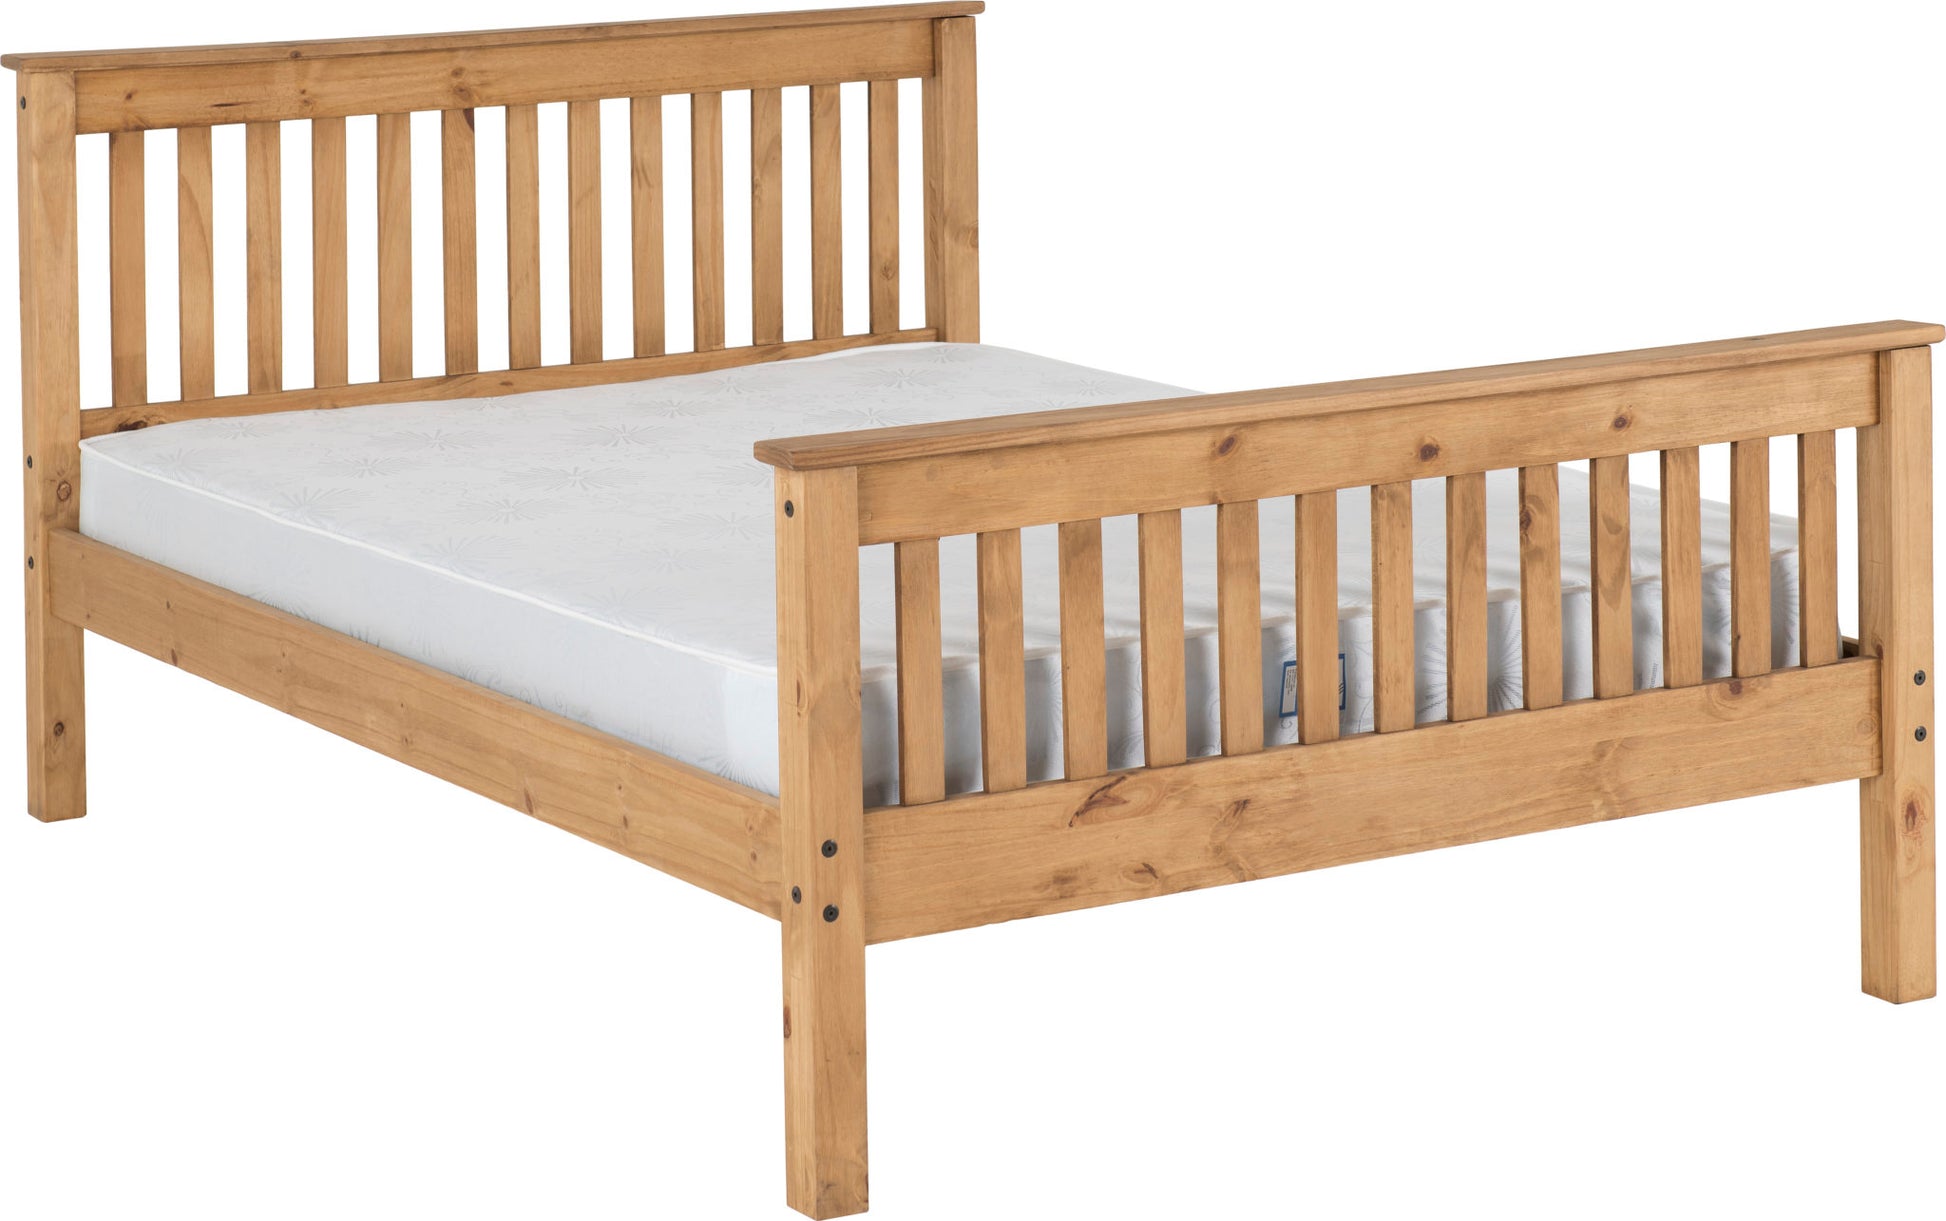 Monaco 4'6" Double Bed High Foot End - Distressed Waxed Pine